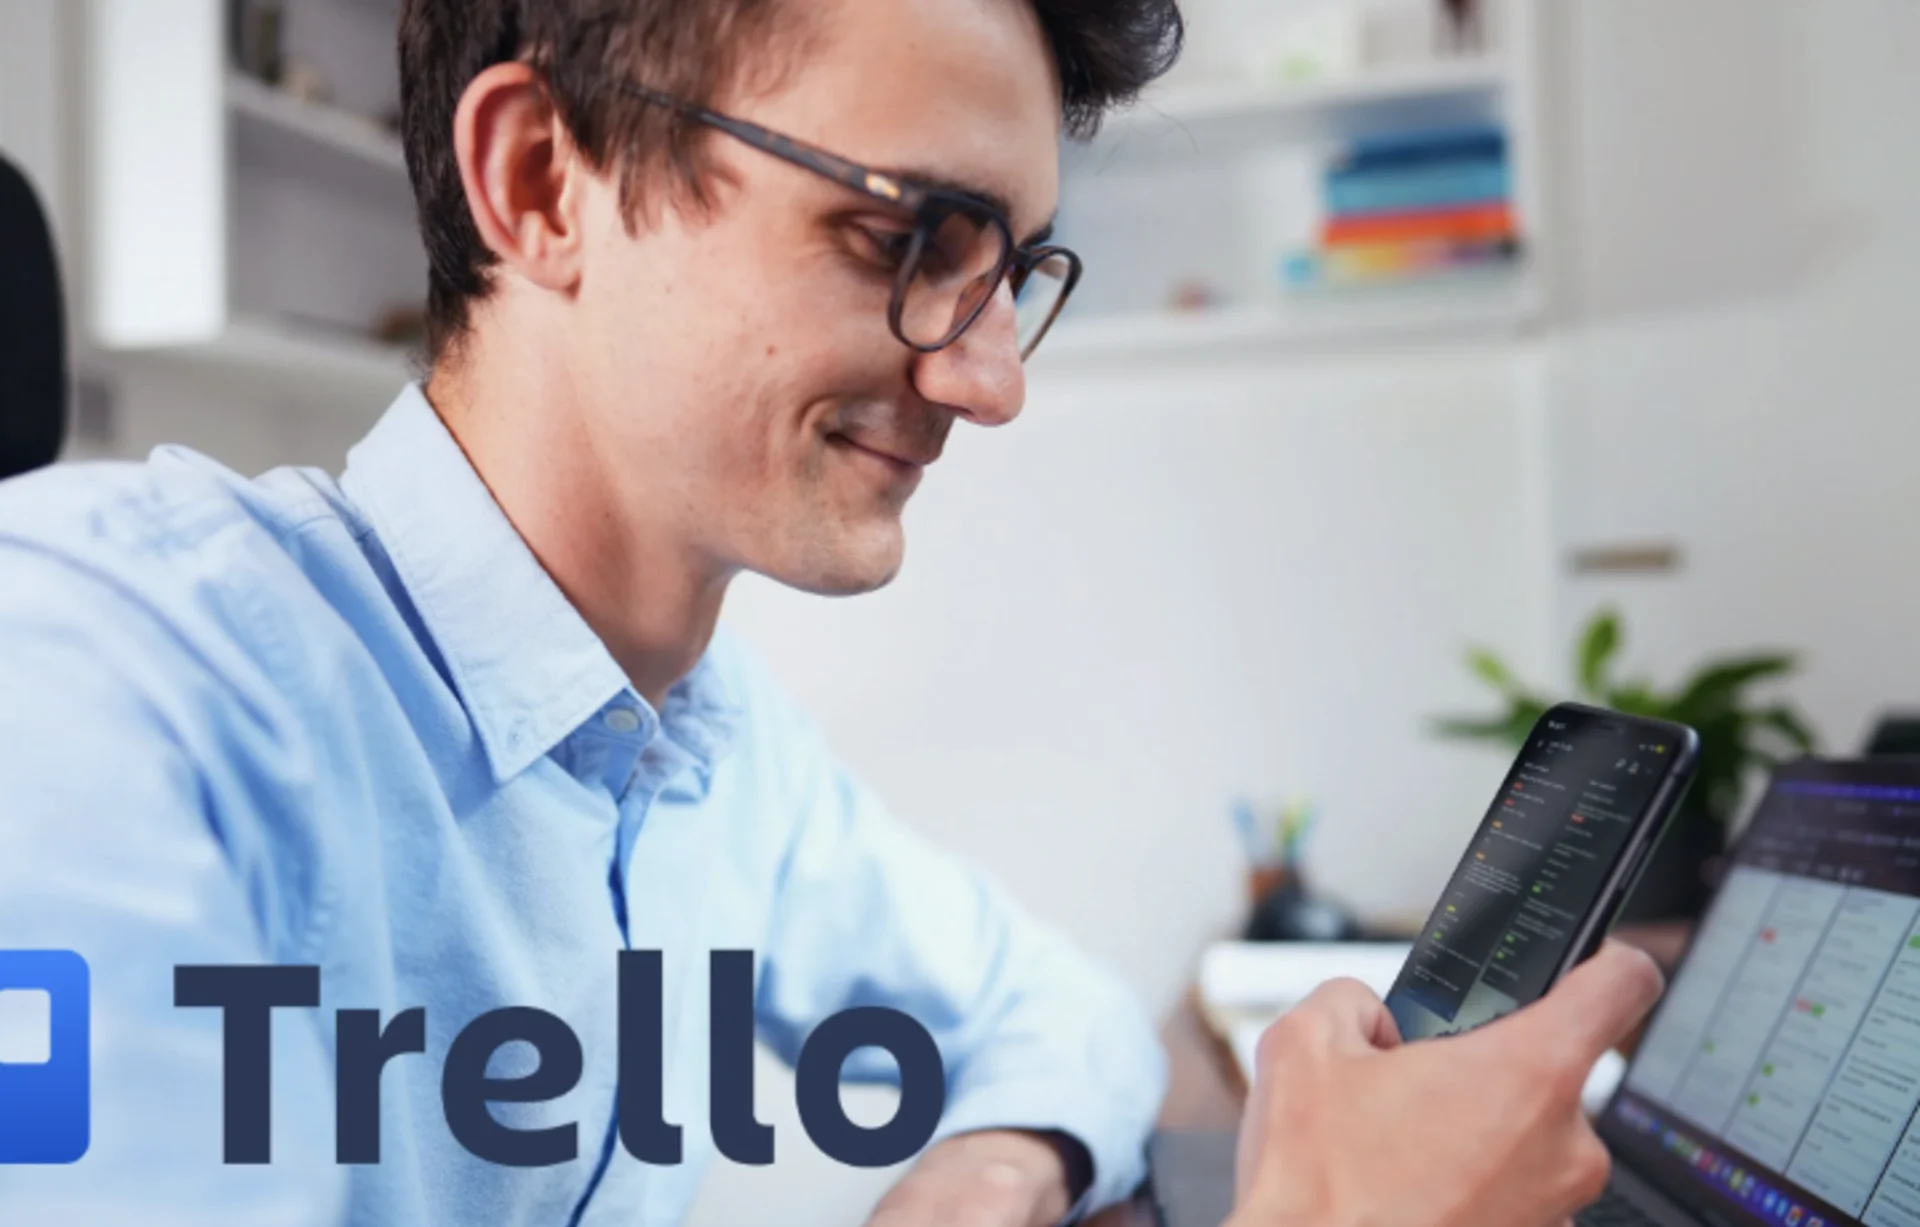 More Focus, Less Stress - Build Your Ultimate Productivity System in Trello